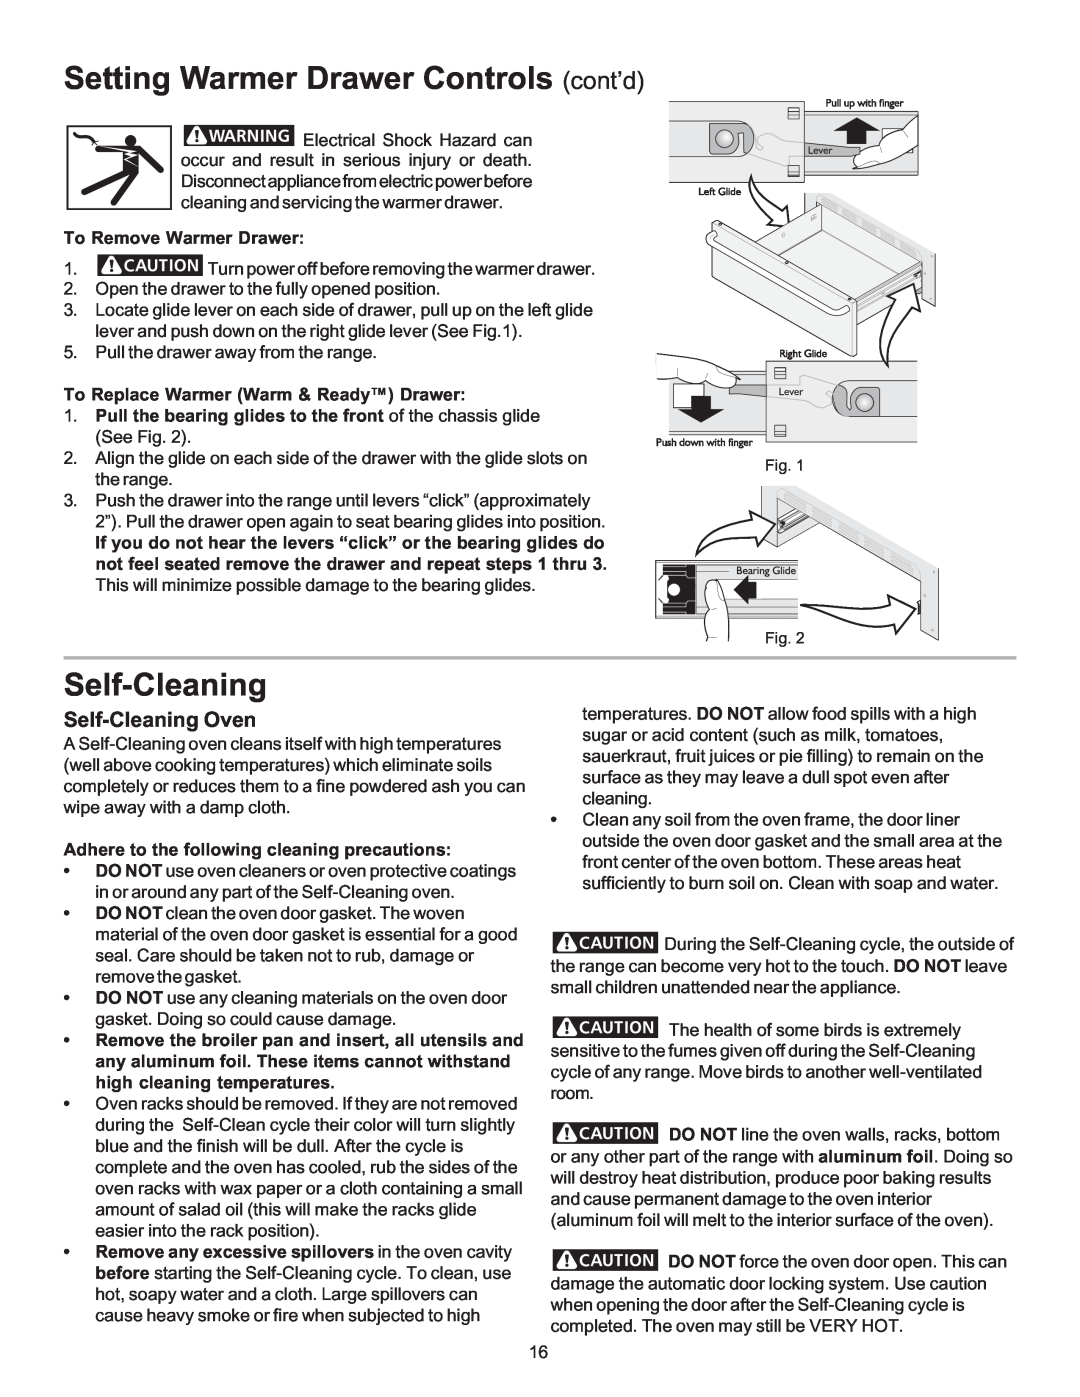 Kenmore 790 manual Setting Warmer Drawer Controls cont’d, Self-Cleaning Oven, To Remove Warmer Drawer 